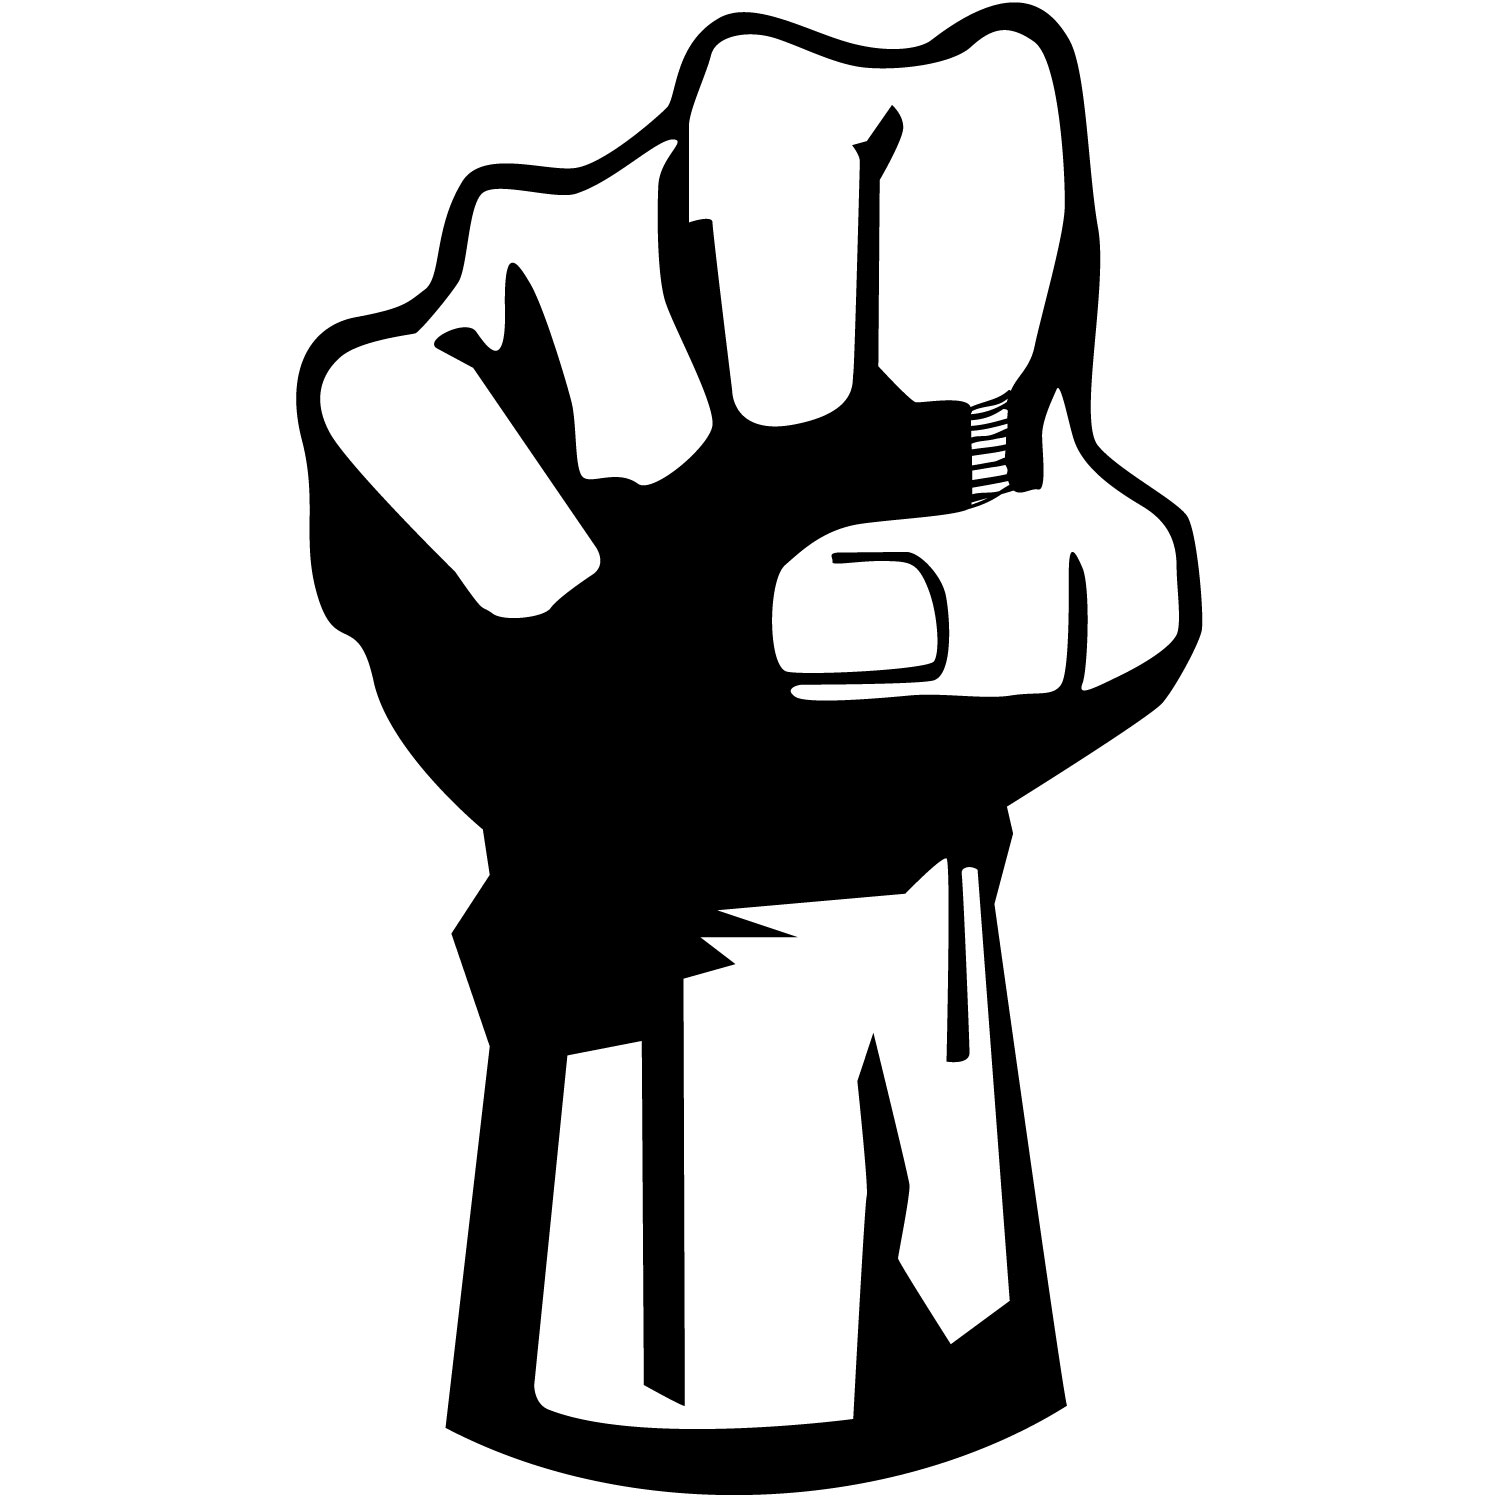 Pictures Of Fists - ClipArt Best